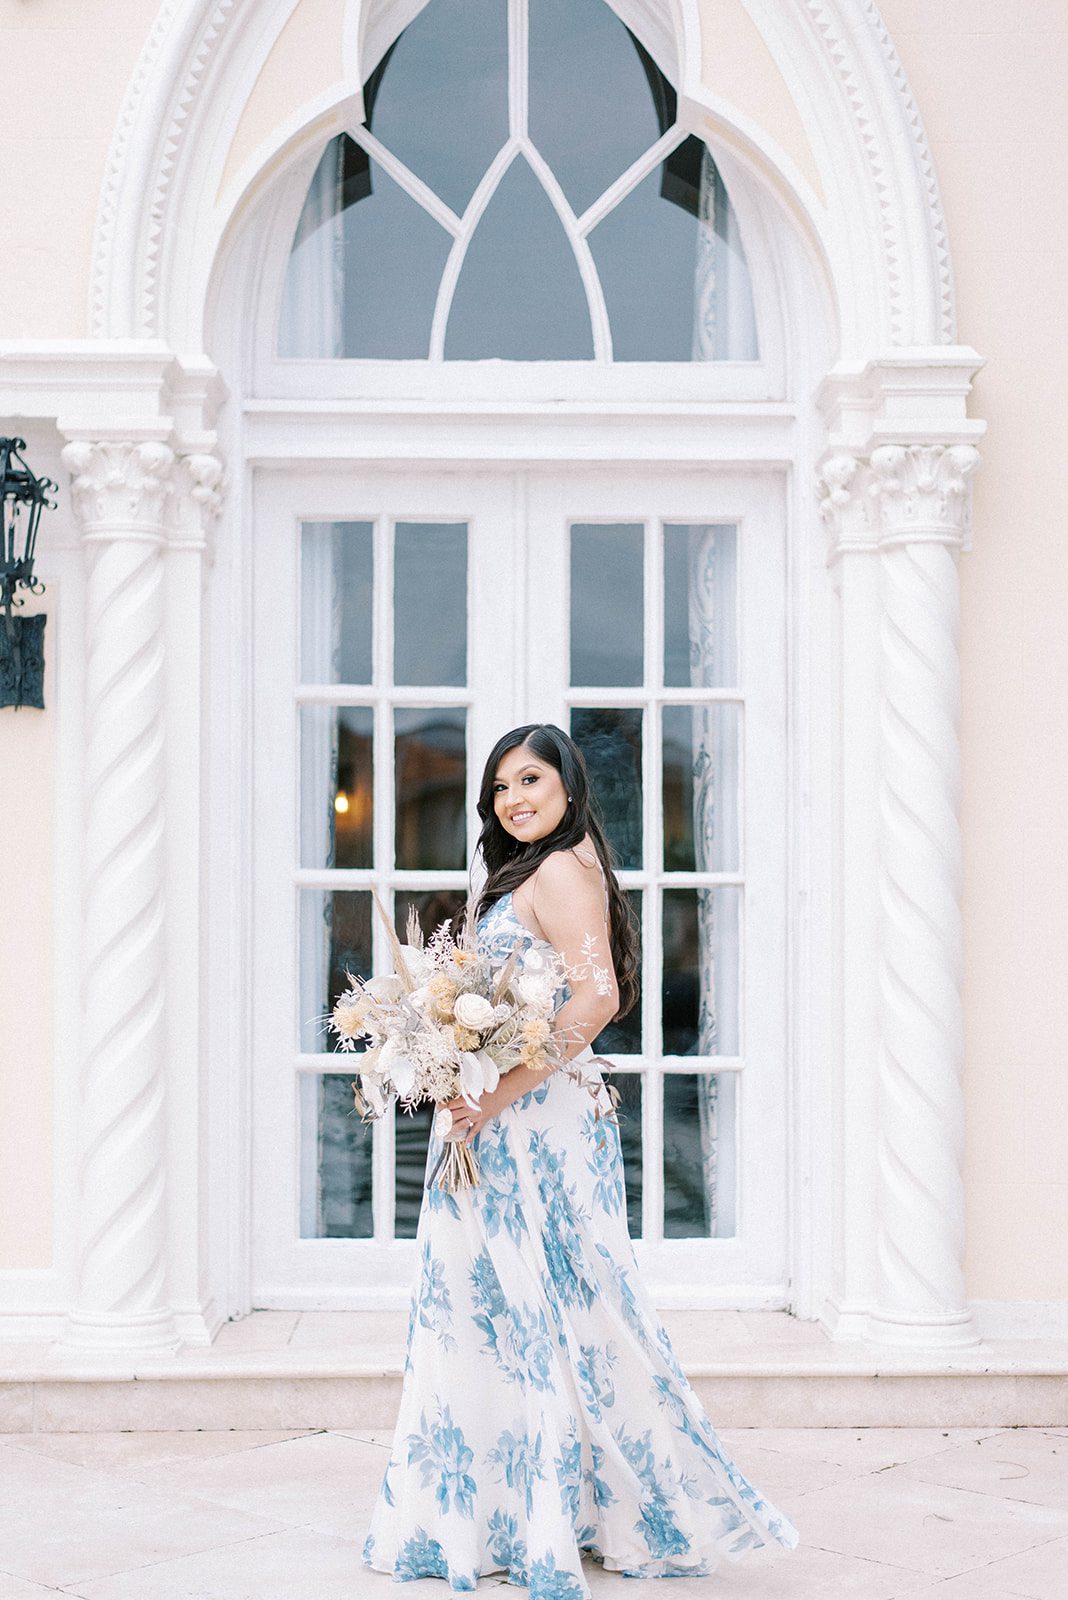 engagement session ay the Mirasol with woman standing in a floor length blue and white gown with floral details and holding a neutral tones bouquet and smiling over her shoulder